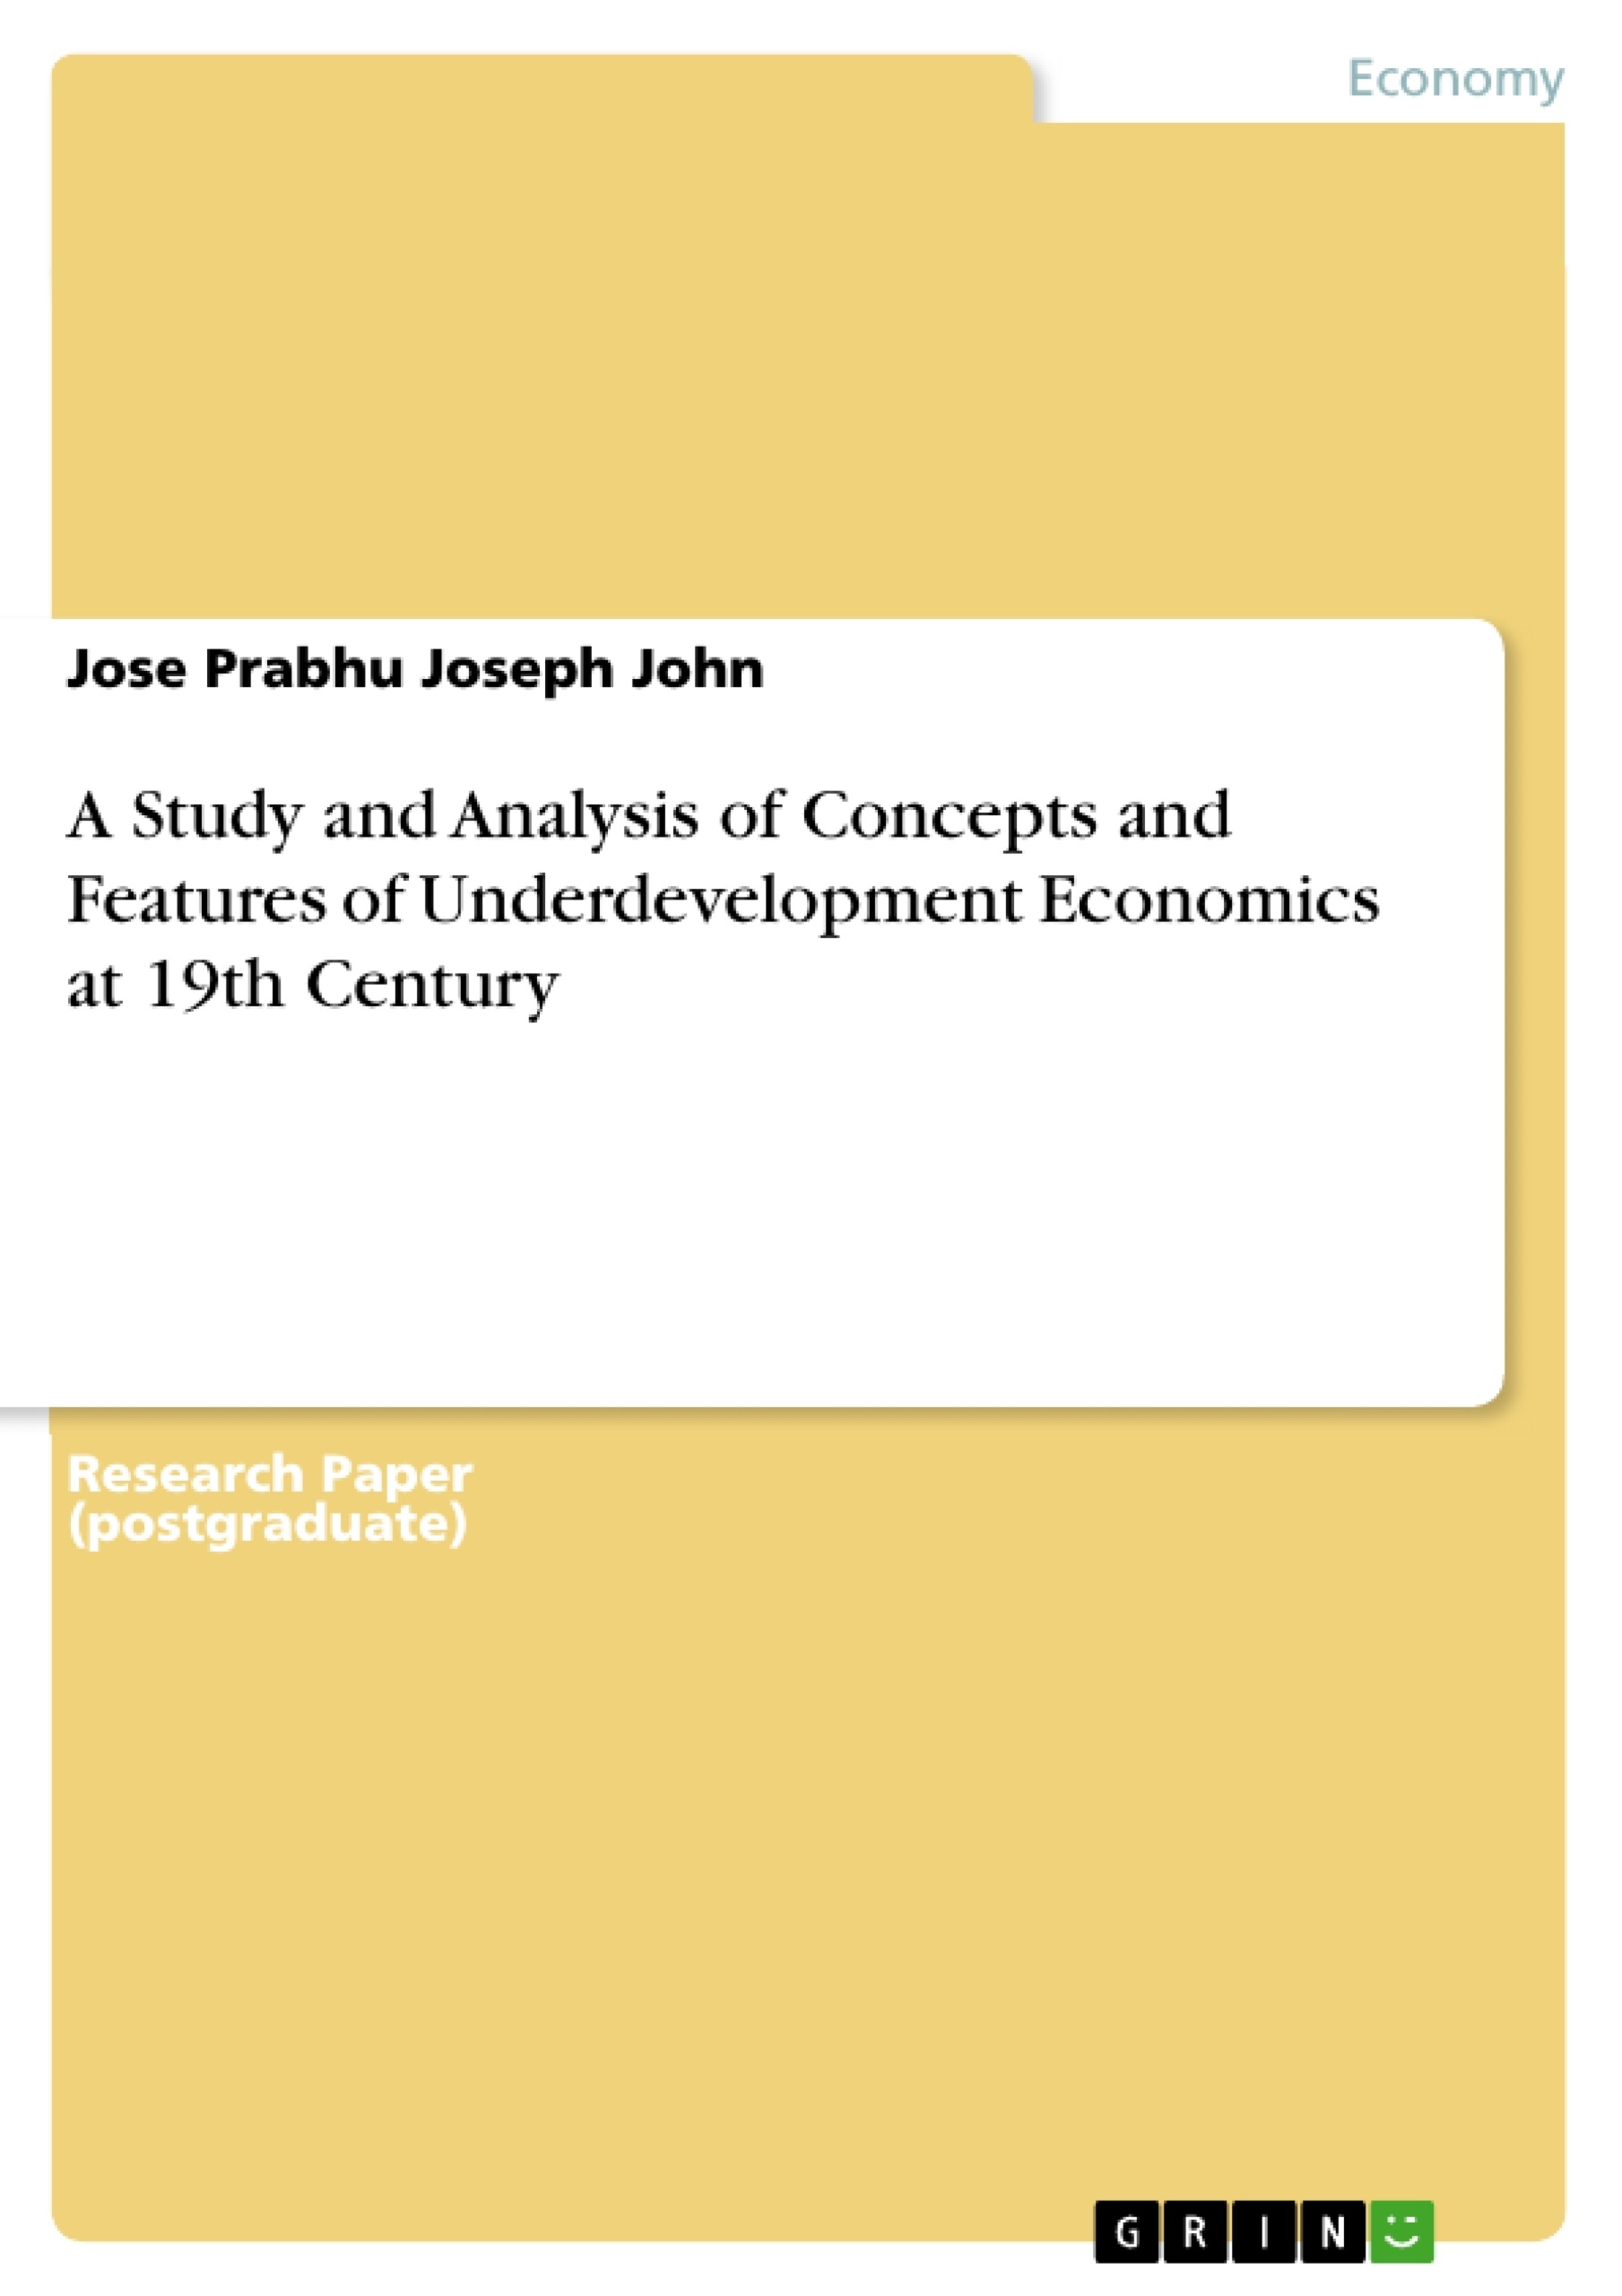 Titre: A Study and Analysis of Concepts and Features of Underdevelopment Economics at 19th Century